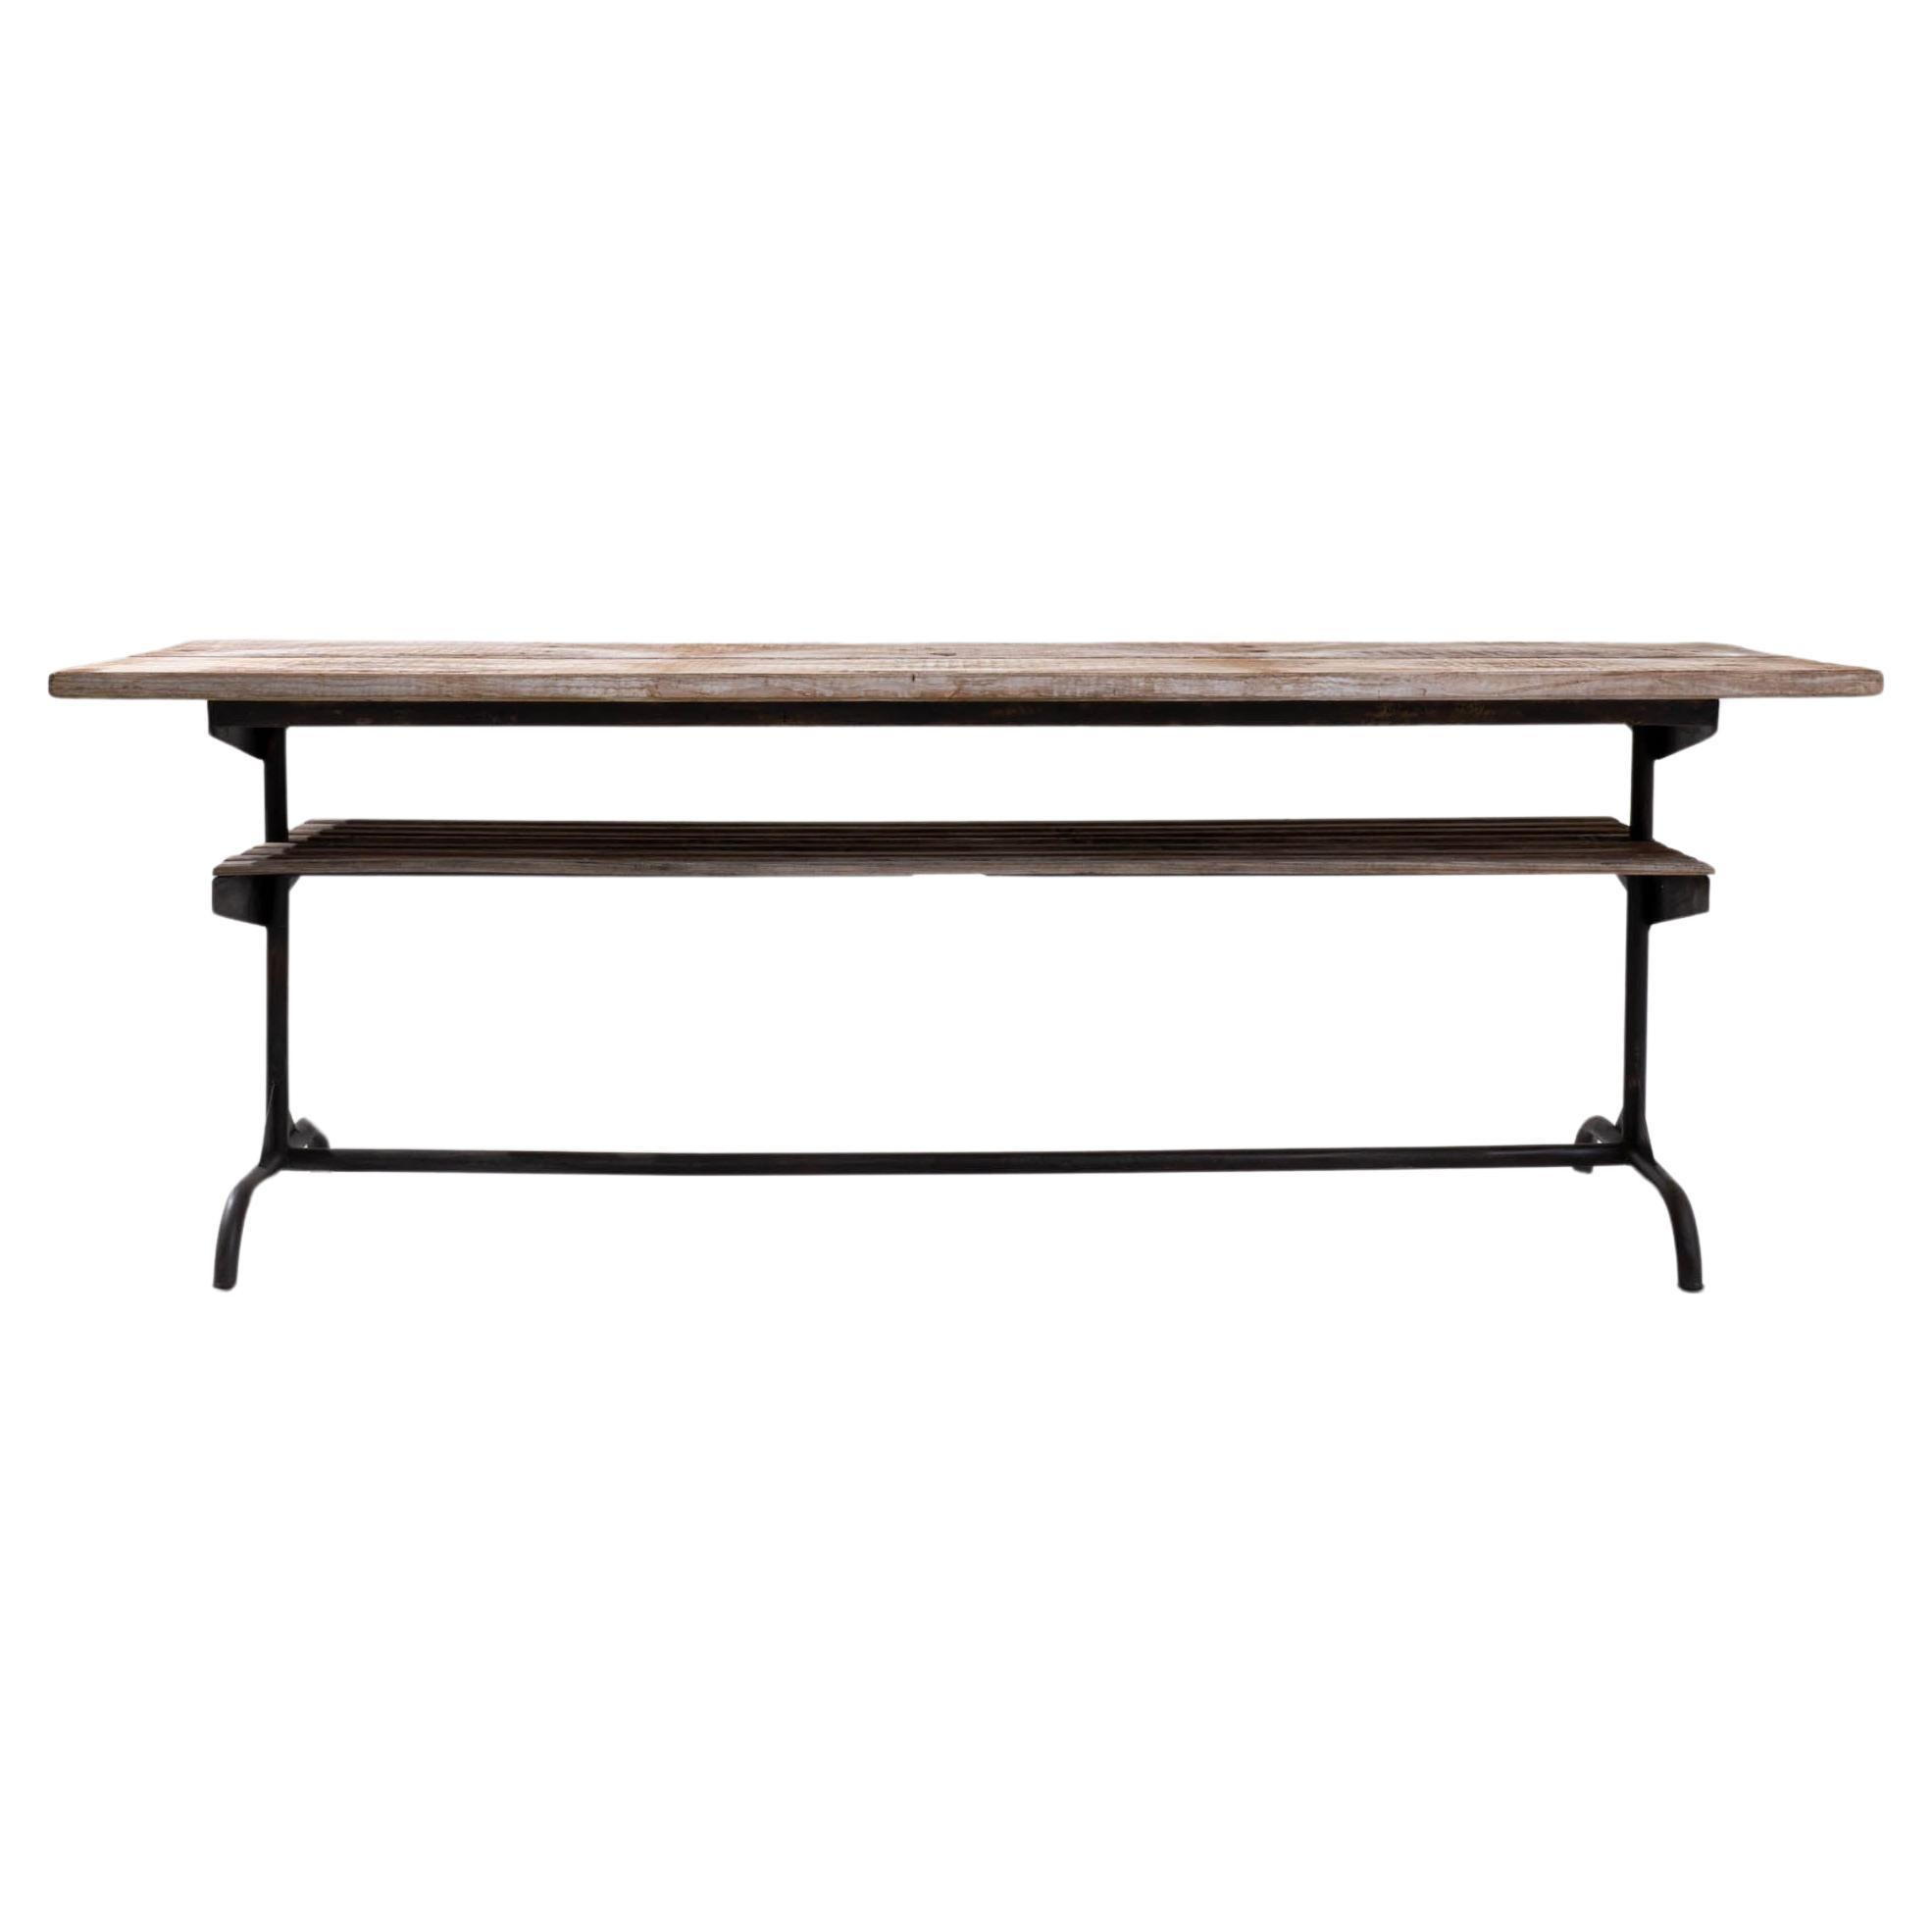 20th Century Central European Industrial Table